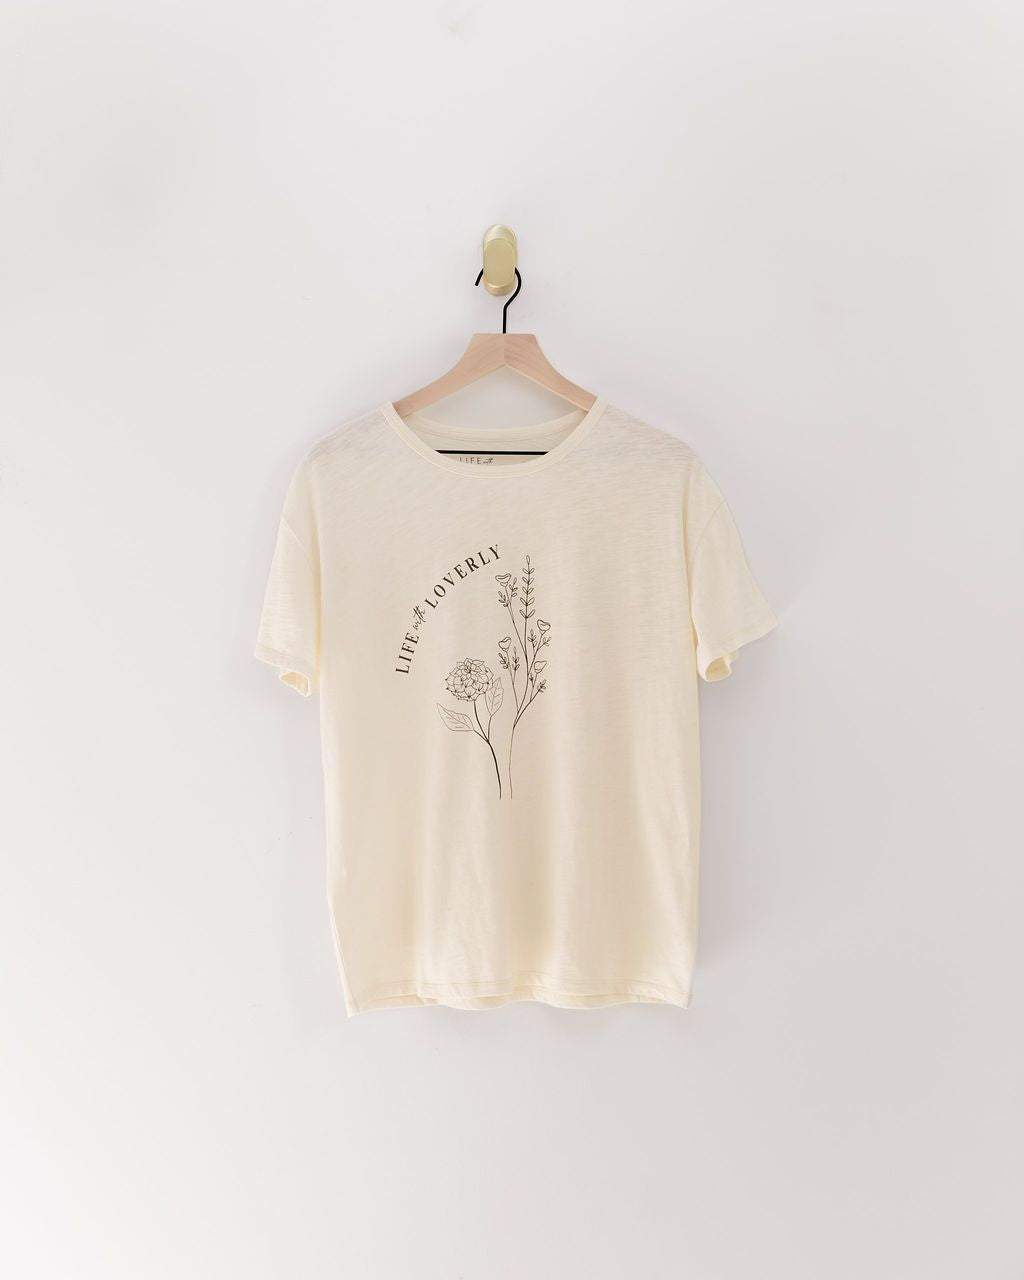 The LWL Wildflower Tee - LIMITED EDITION